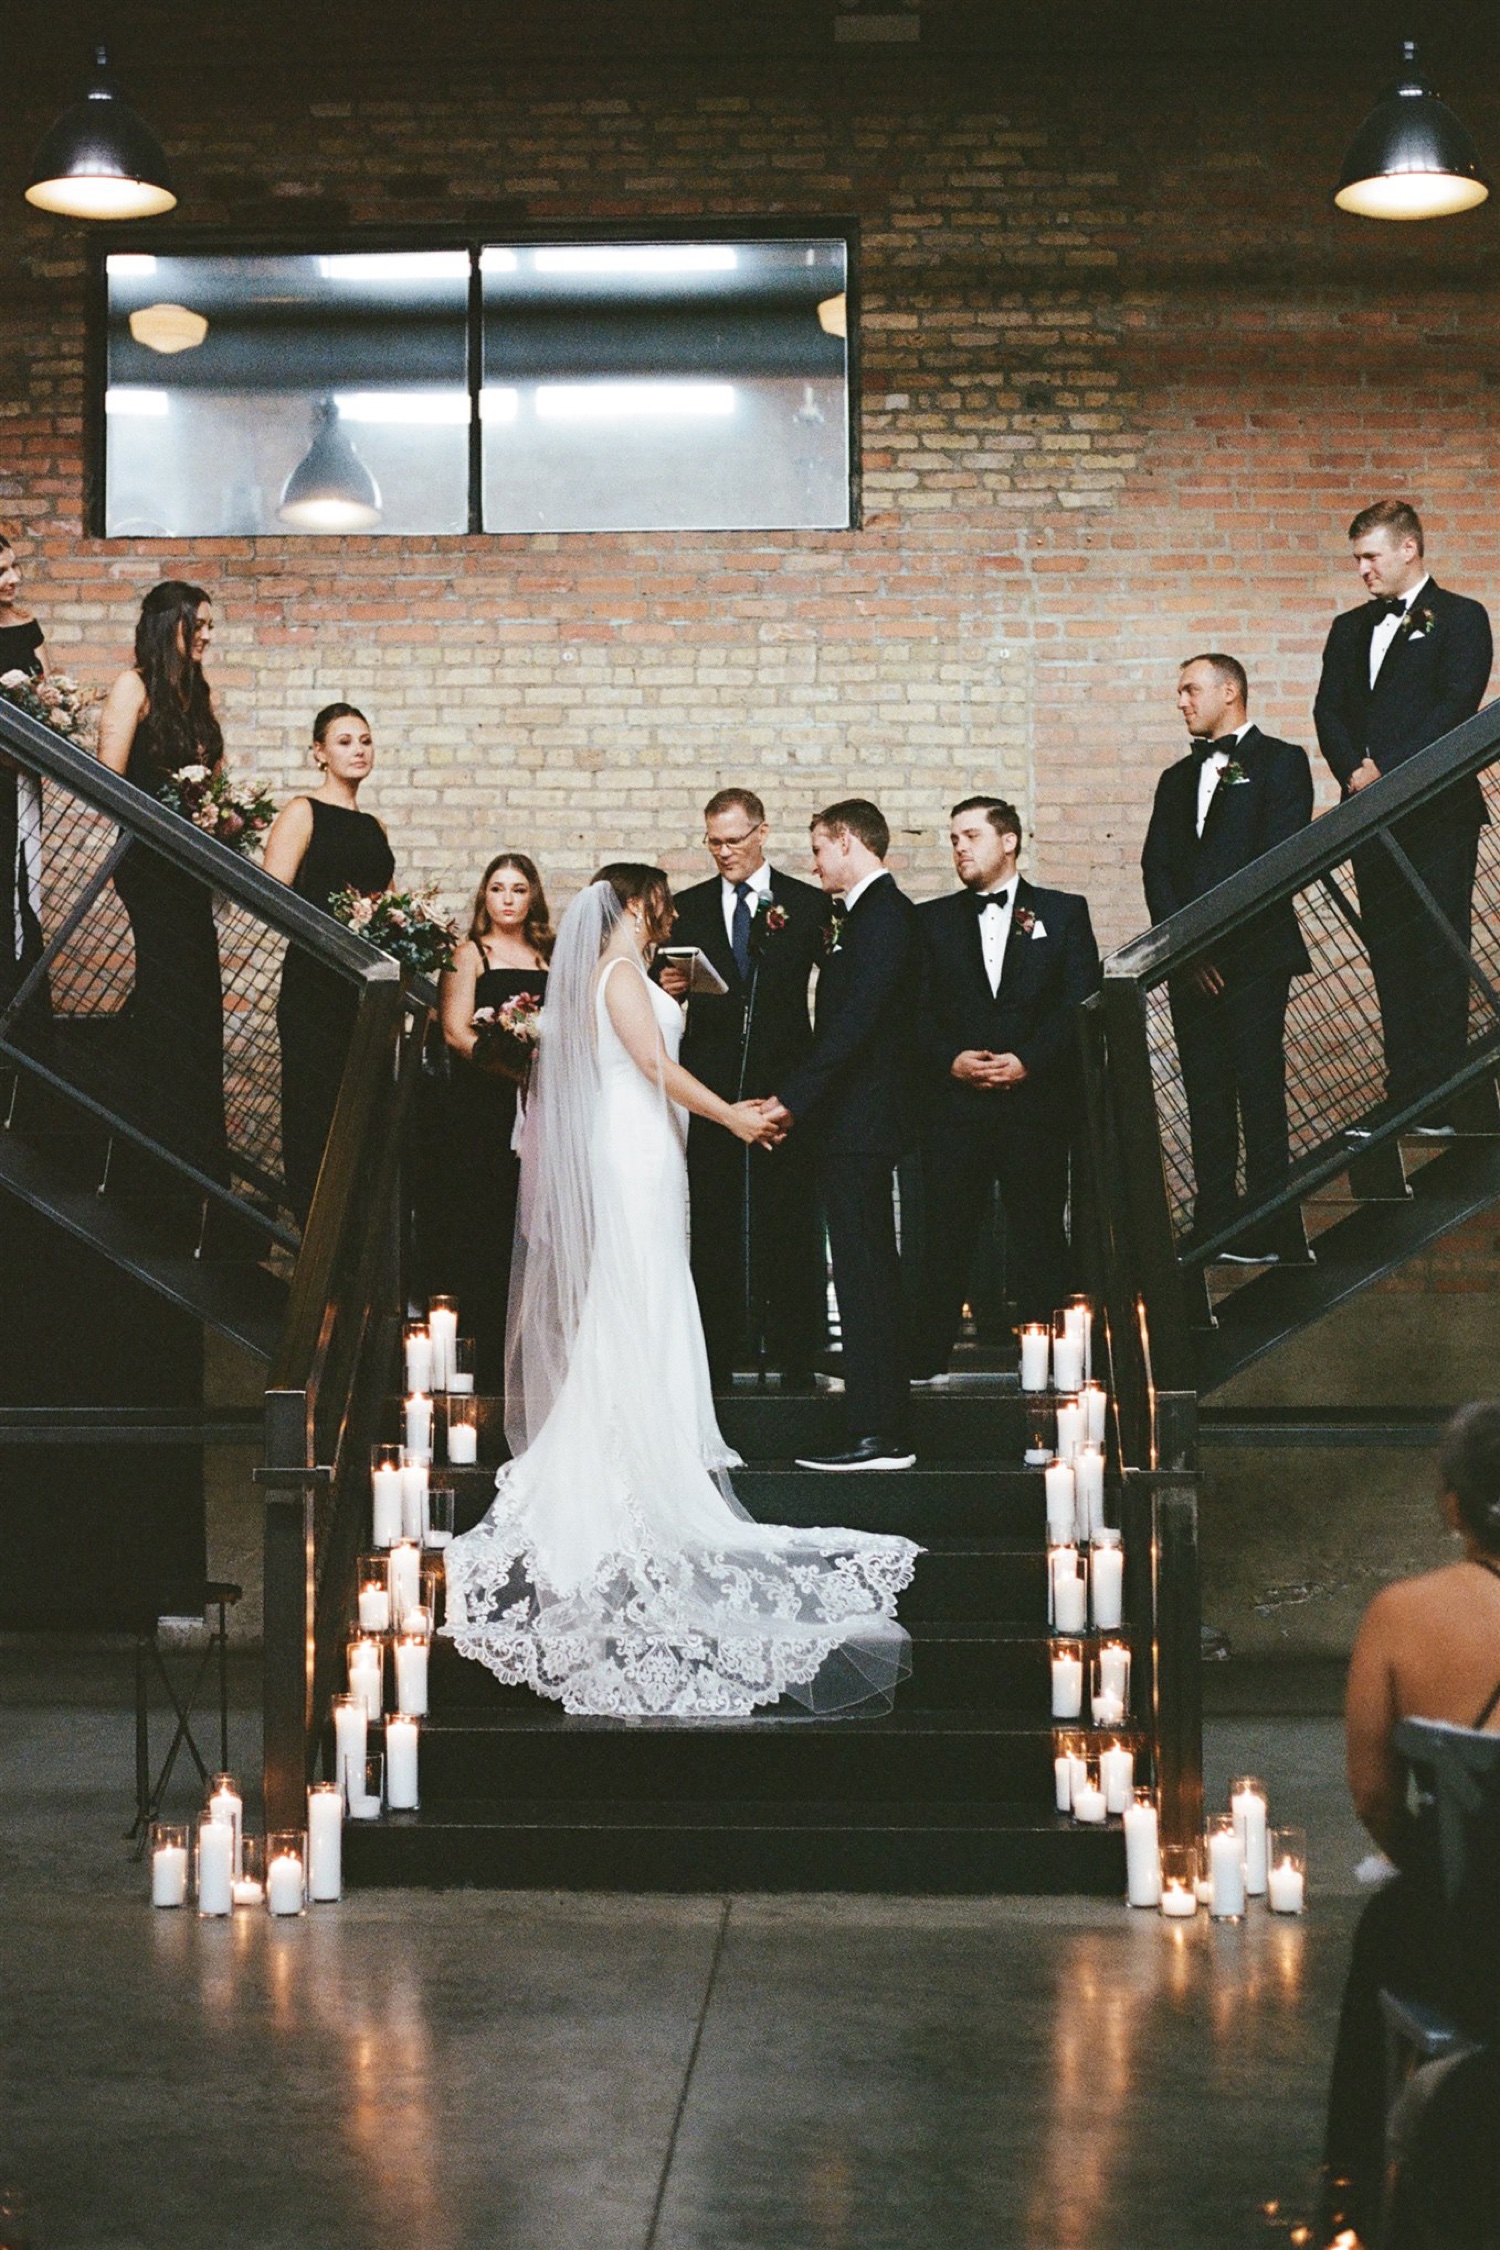 imperial staircase wedding portraits; wedding film photography